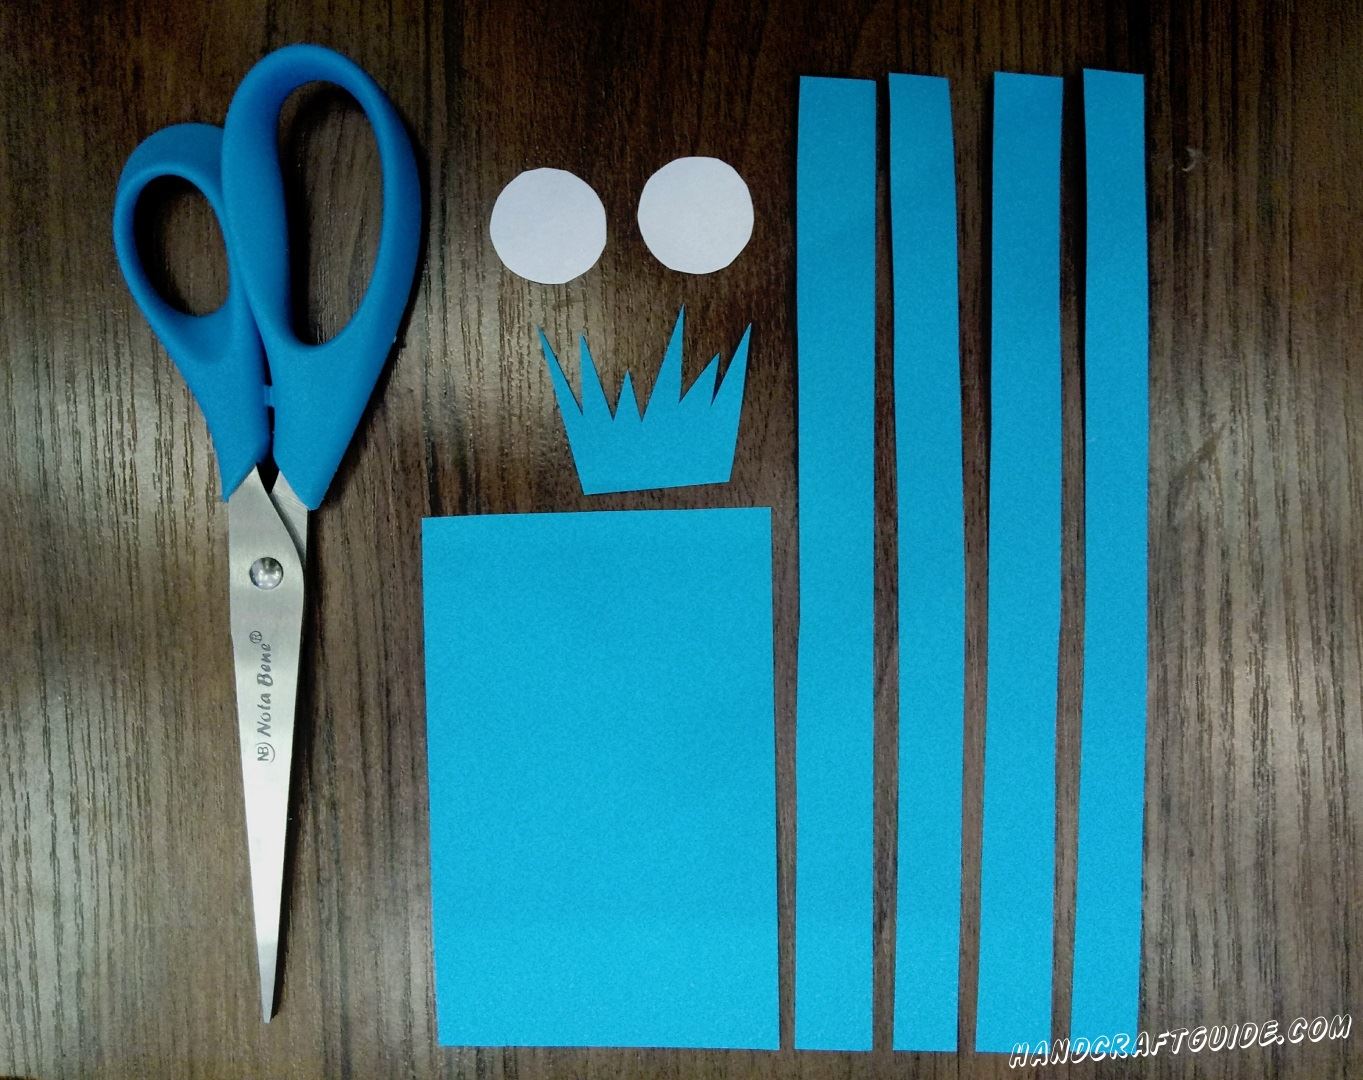 Cut out little figures of the blue construction paper like it is shown in the picture.